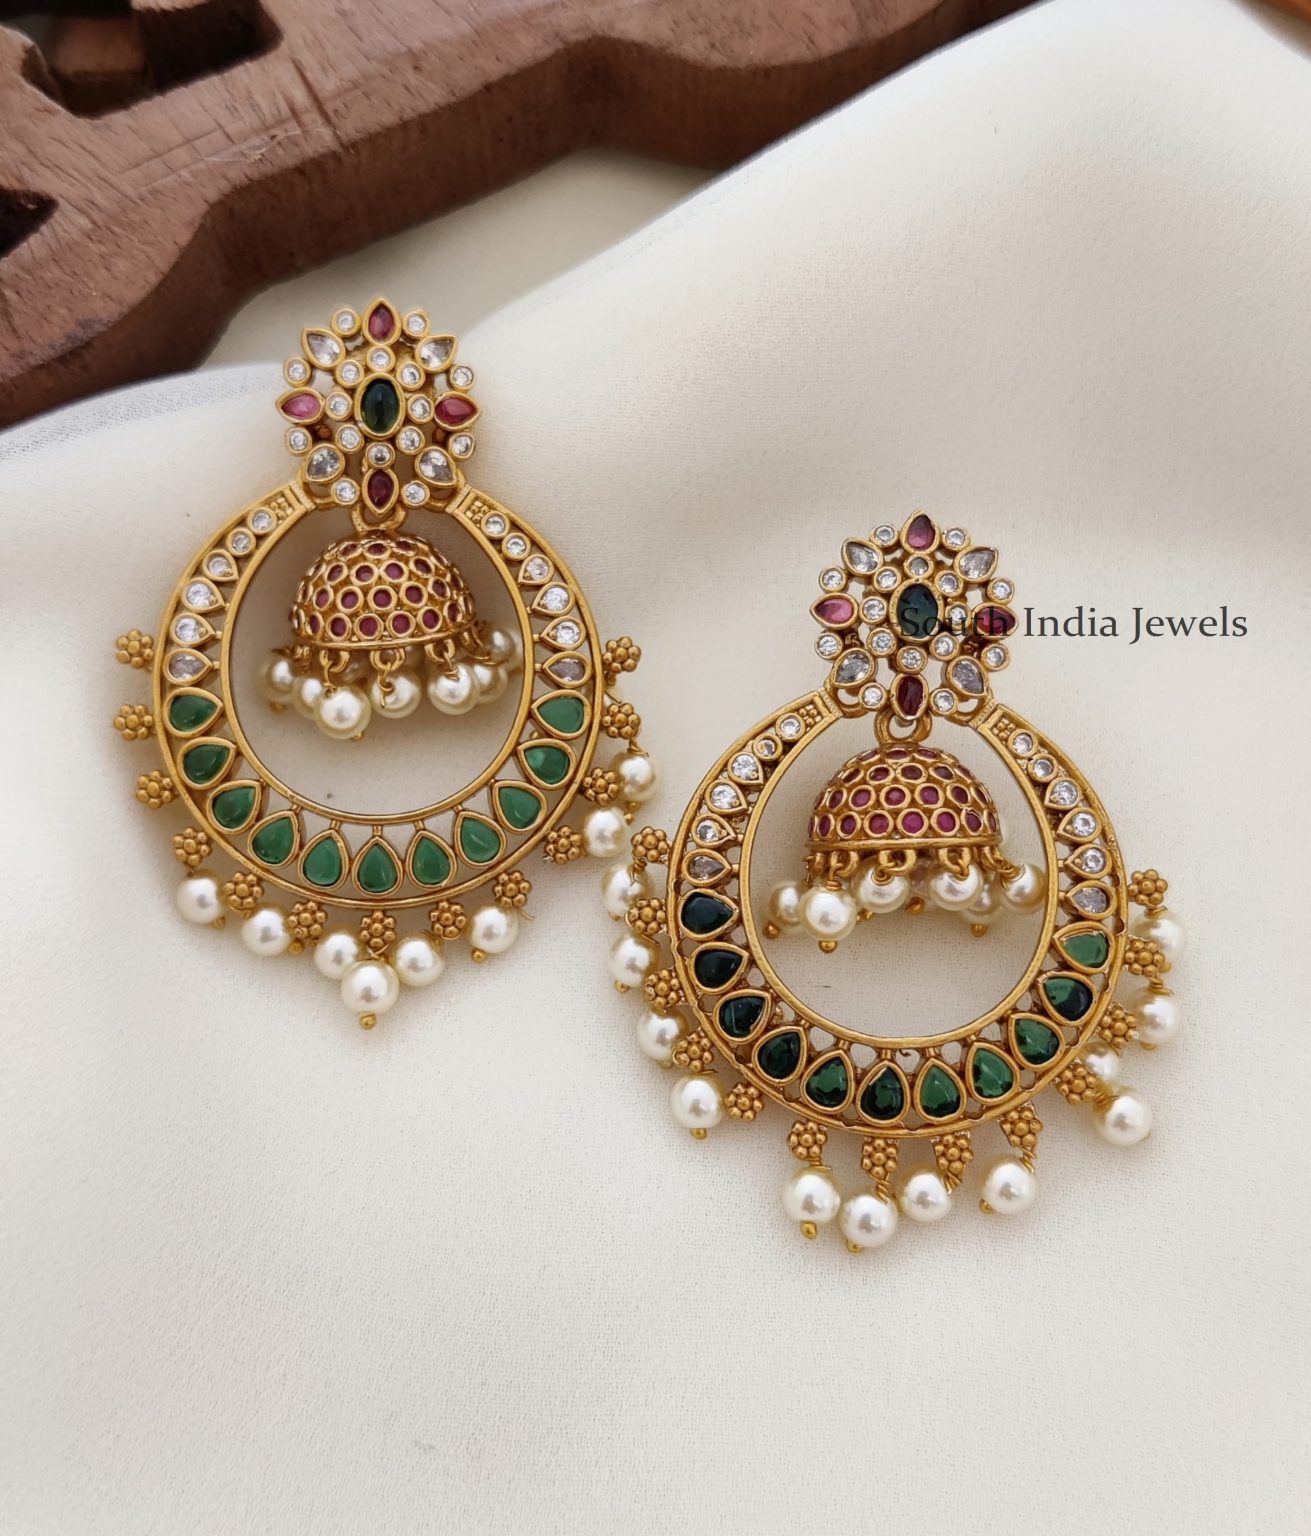 Chandbali Earrings | Earrings Collections - South India Jewels